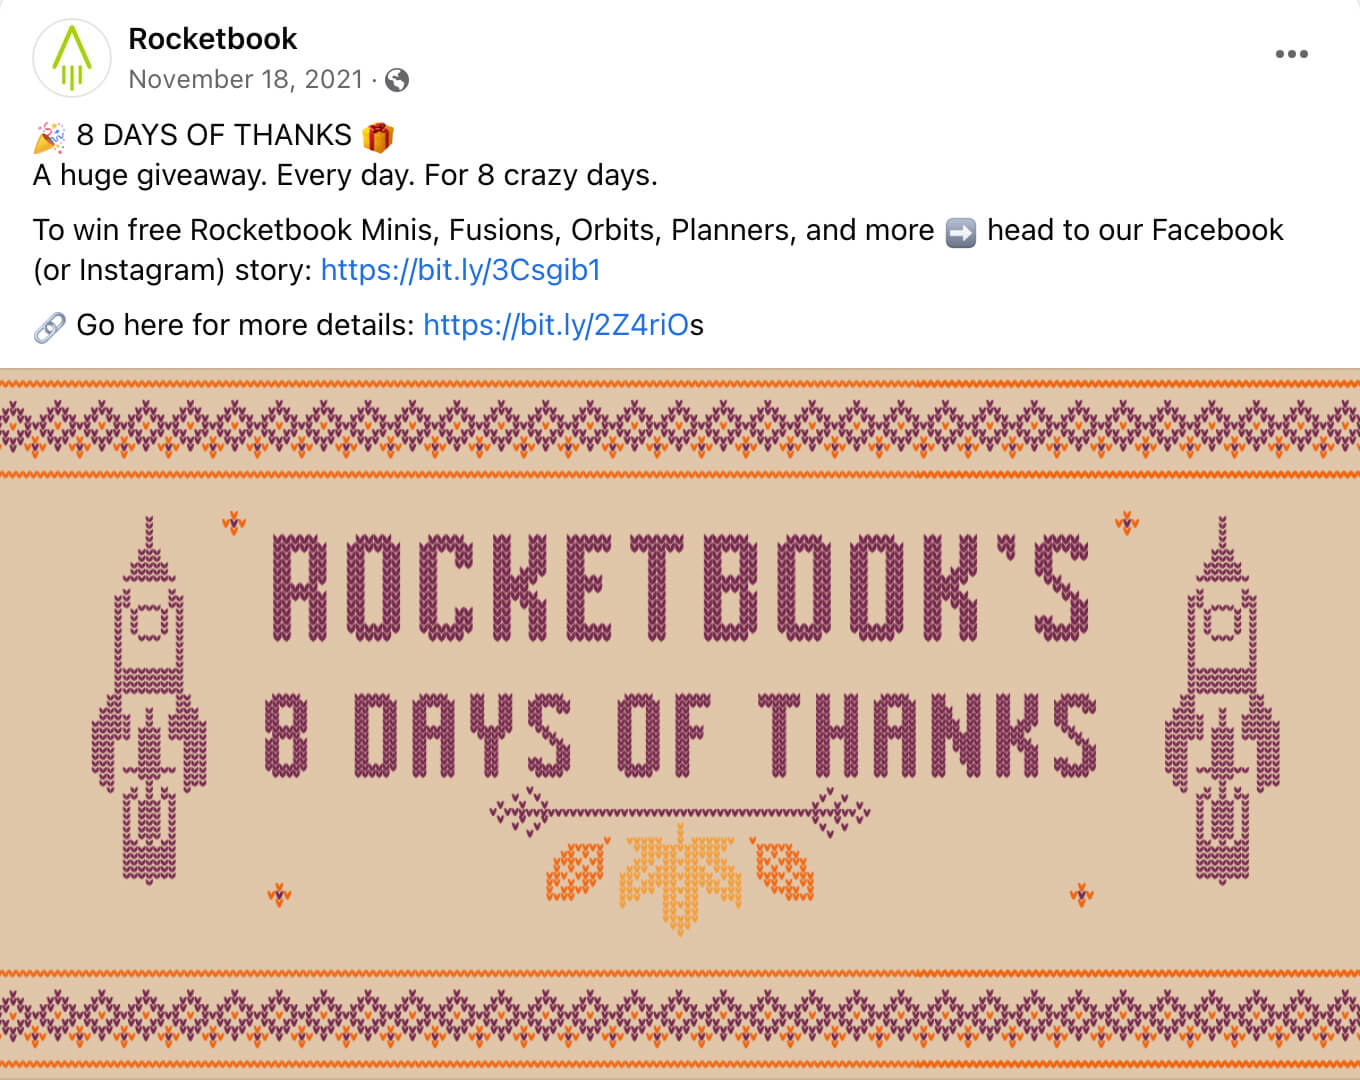 how-to-create-momentum-with-a-multi-day-social-media-giveaway-seasonal-holiday-giveaways-and-contests-rocketbook-example-2